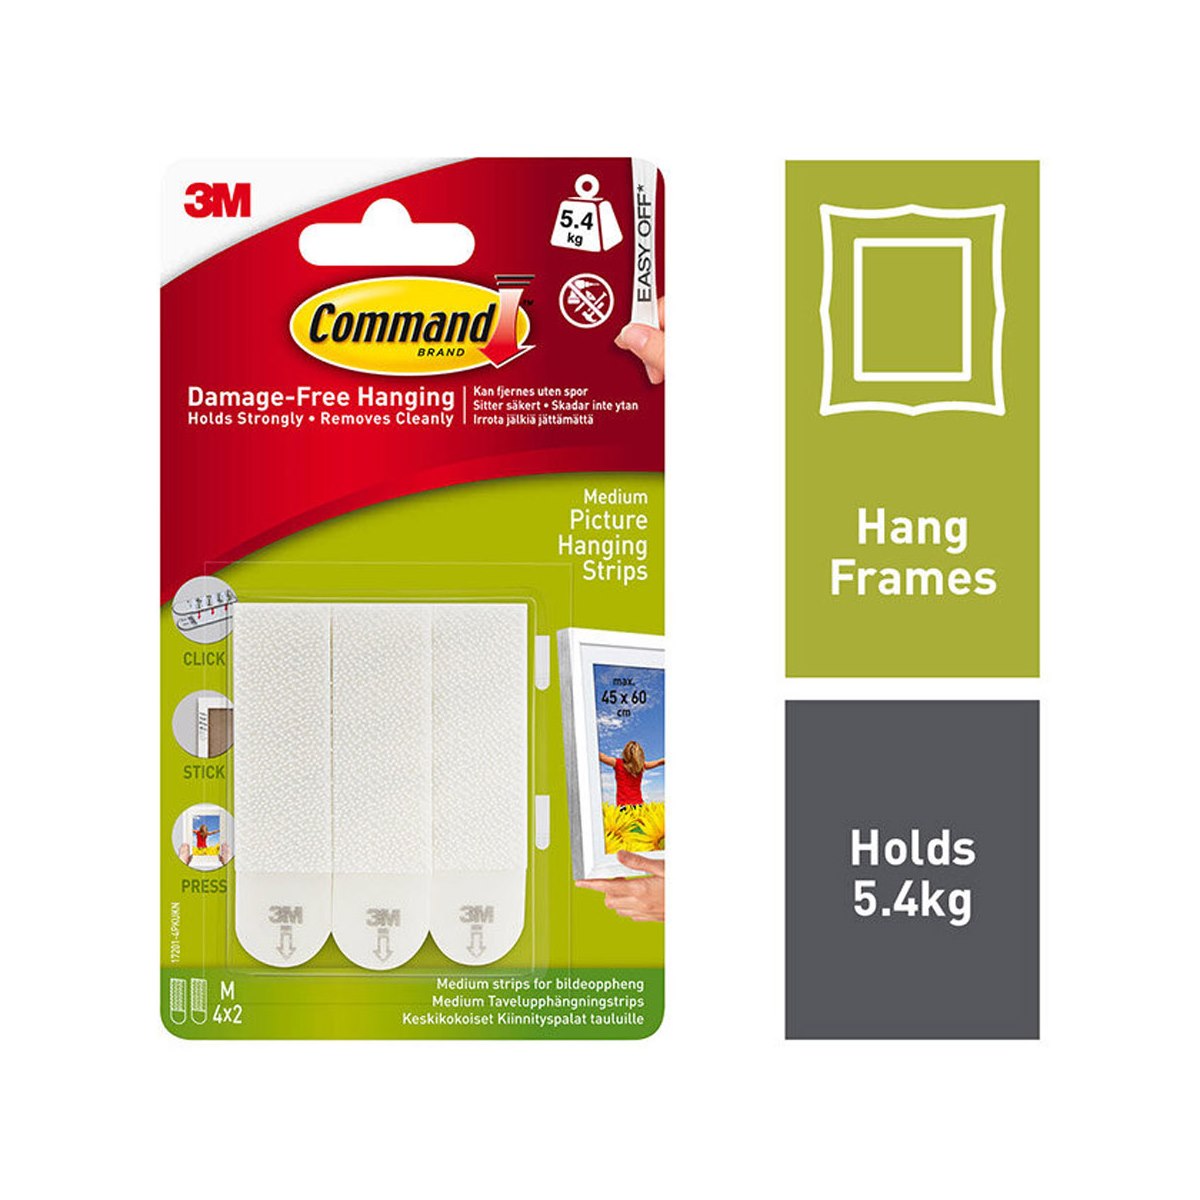 Command Medium Picture Hanging Strips Value Pack 4pk